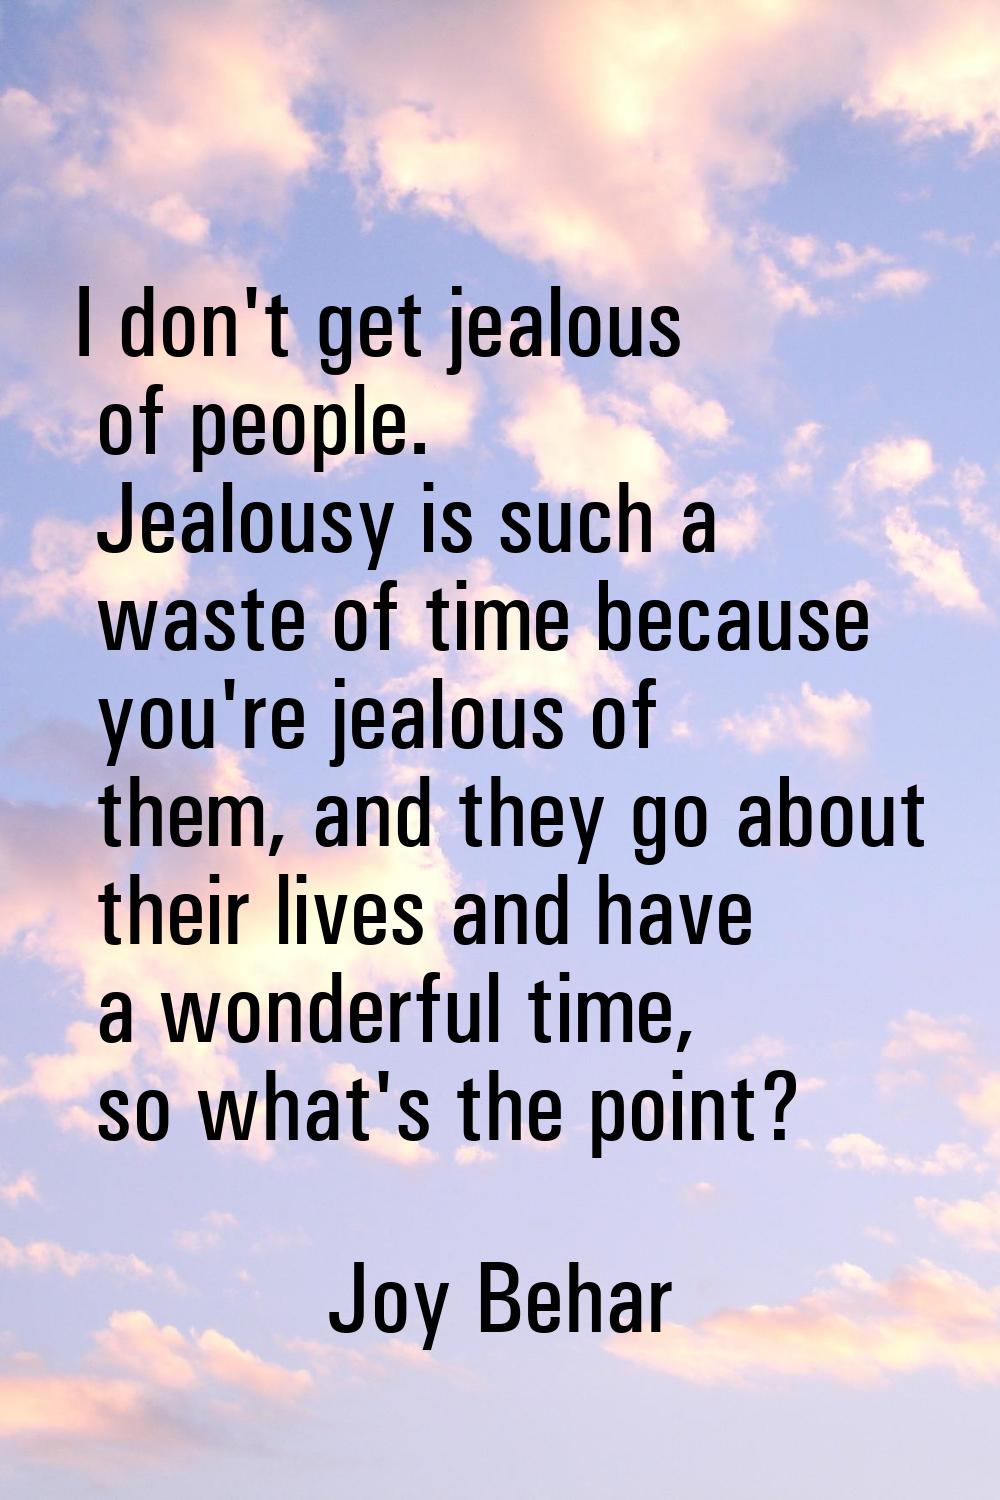 I don't get jealous of people. Jealousy is such a waste of time because you're jealous of them, and